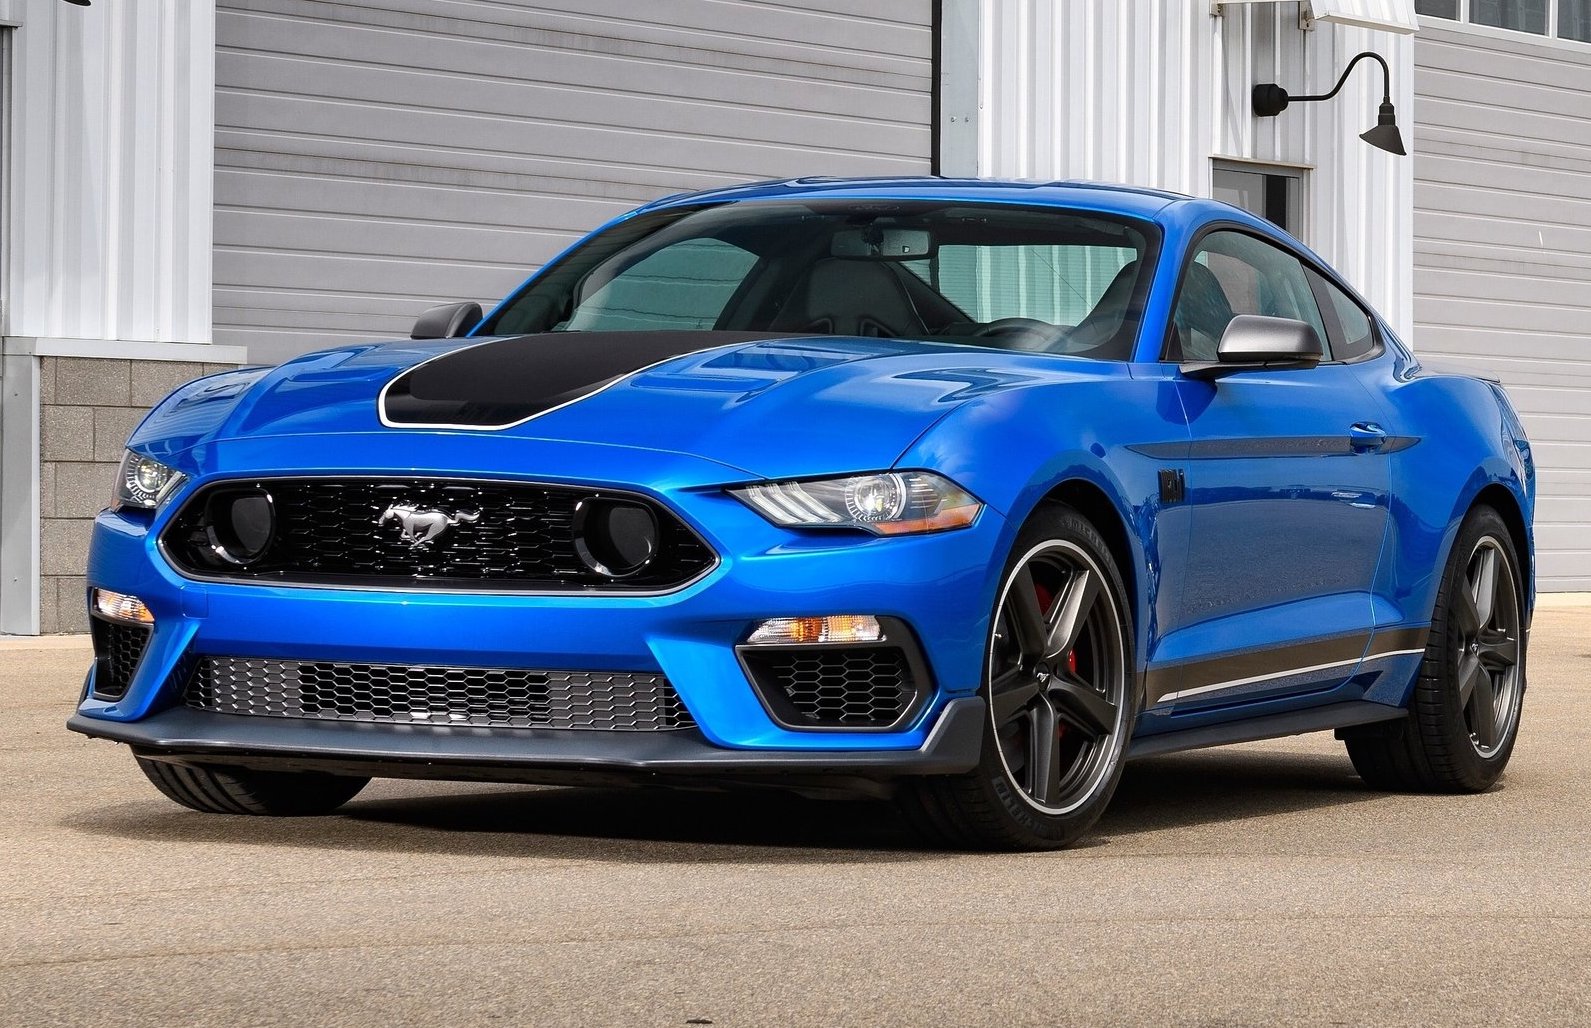 2021 Ford Mustang Mach 1 revealed, revives iconic name | PerformanceDrive